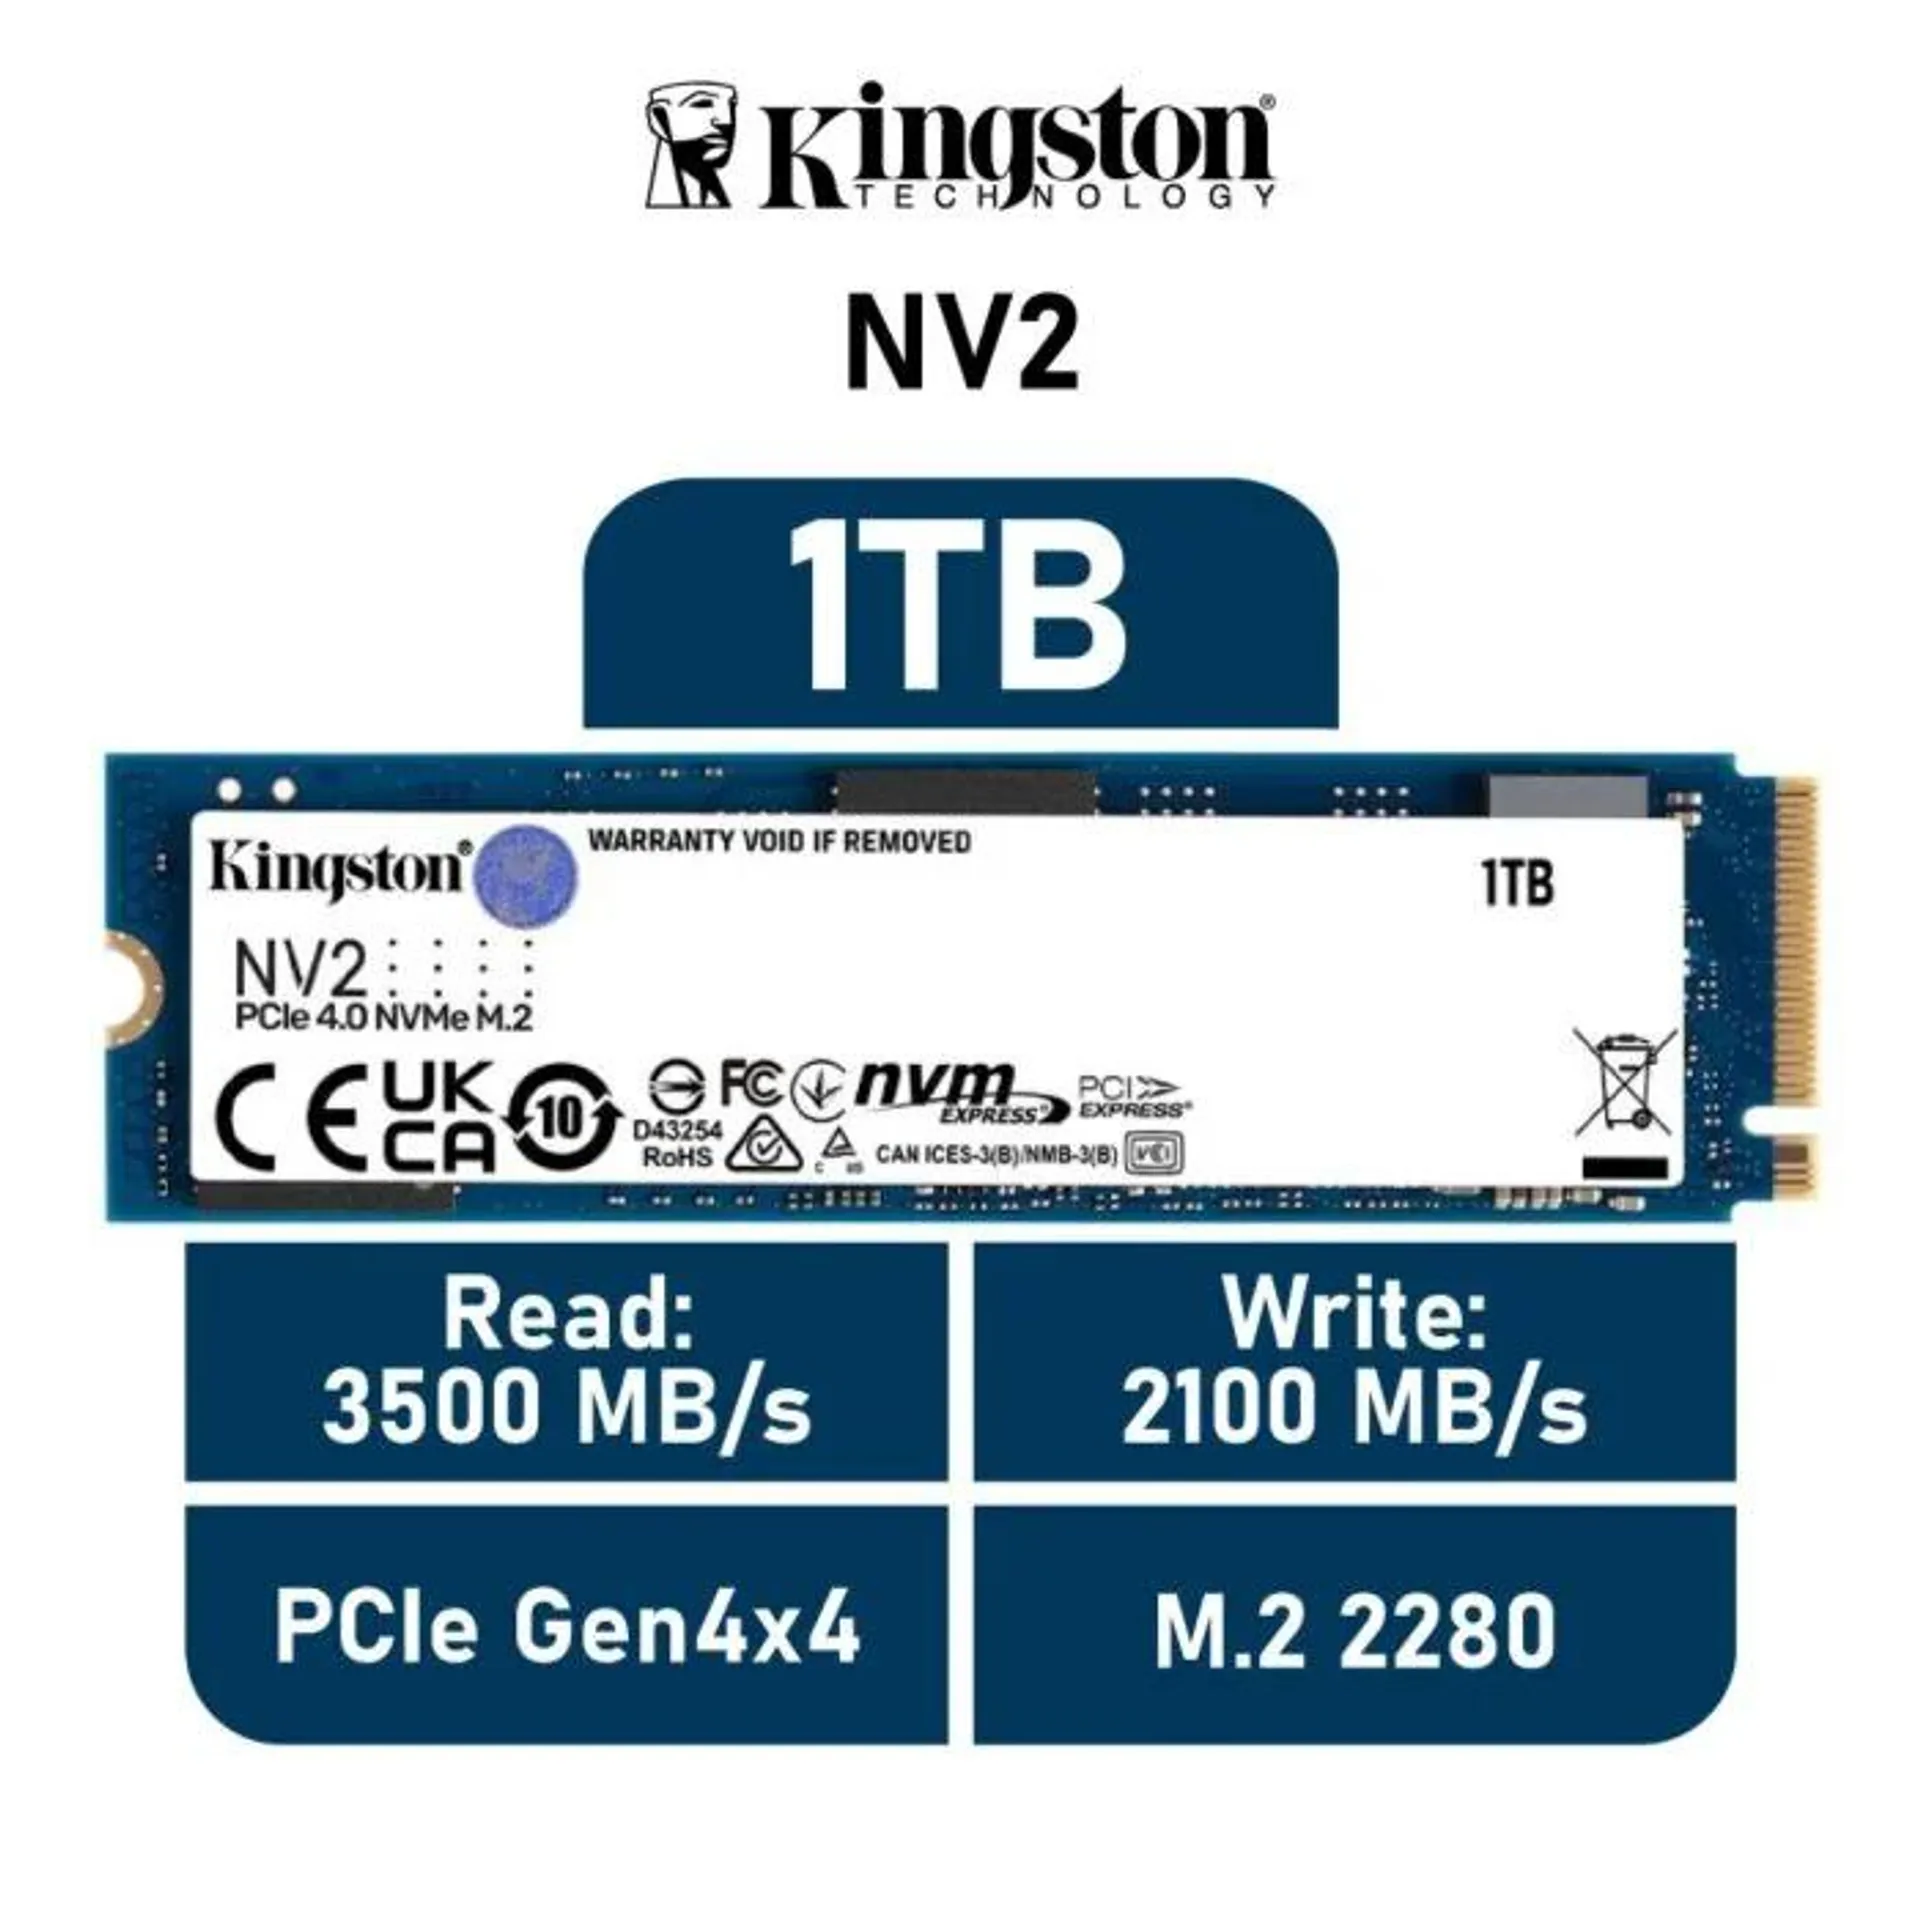 Kingston NV2 1TB PCIe Gen4x4 SNV2S/1000G M.2 2280 Solid State Drive